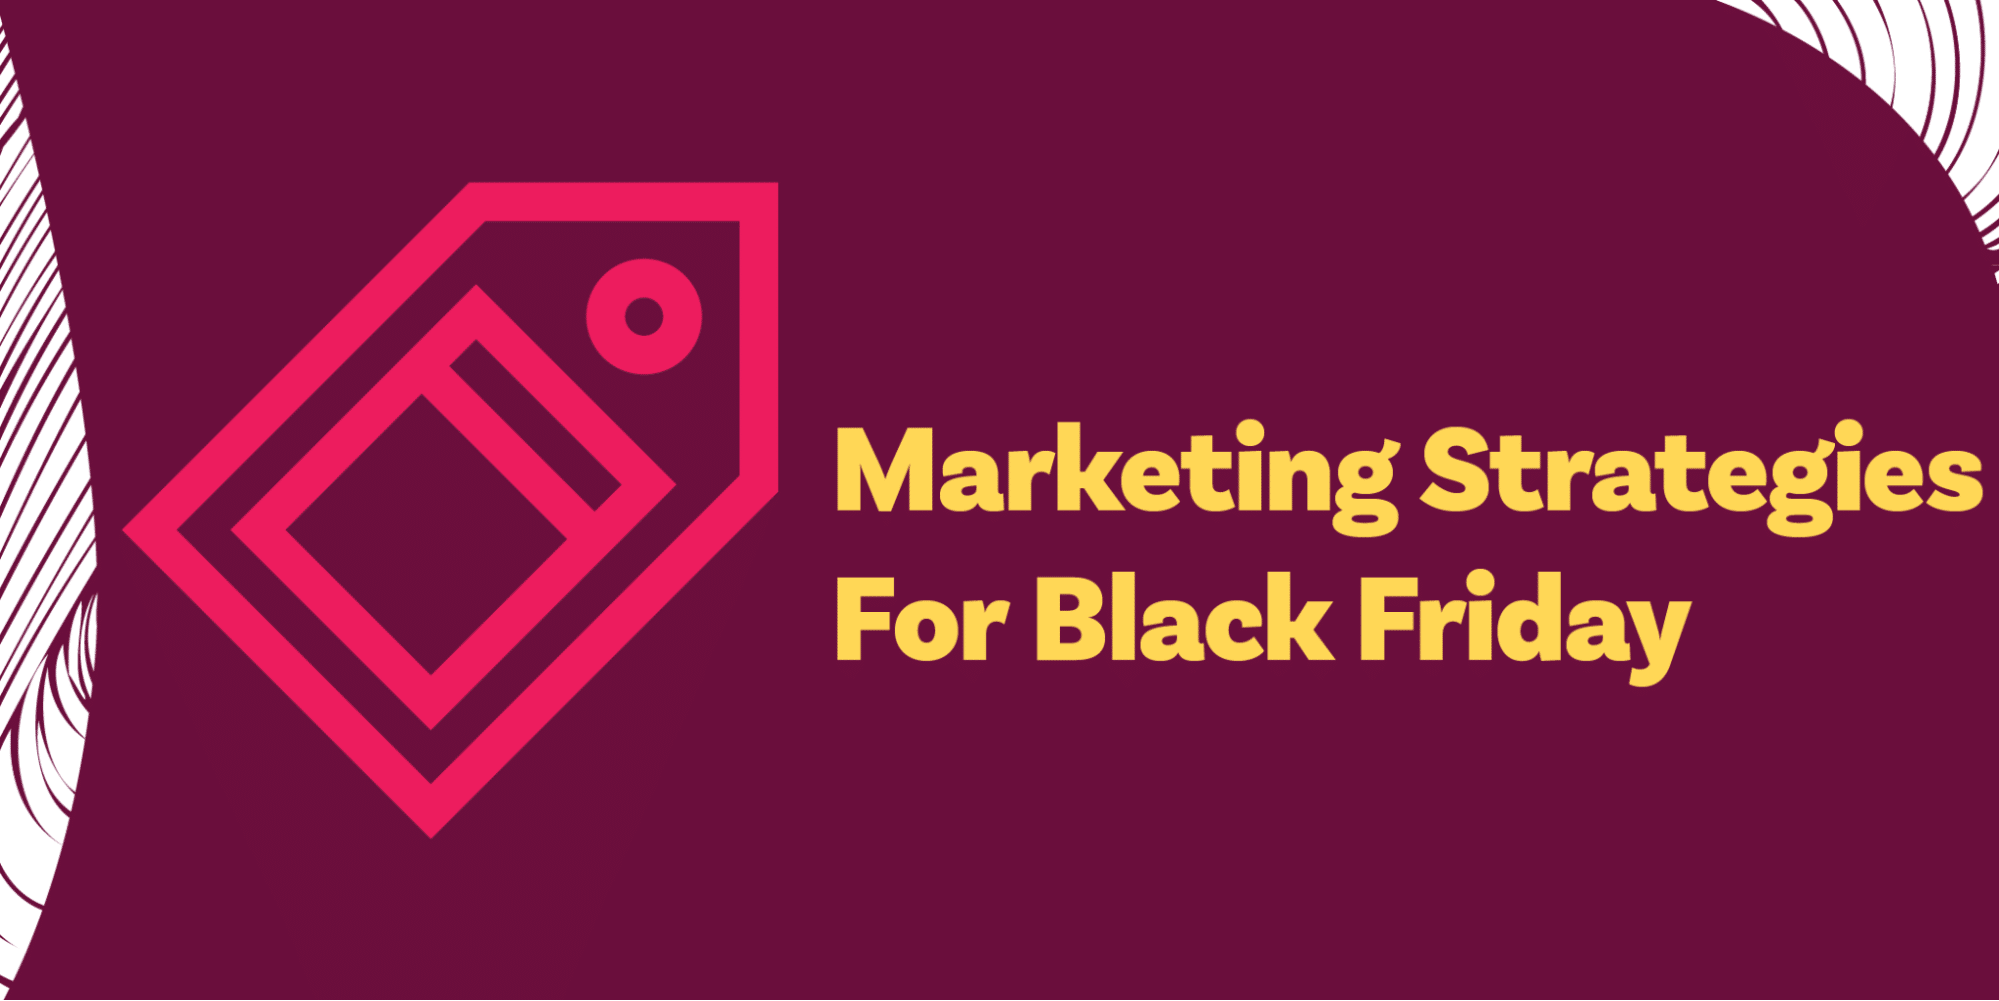 Top Marketing Strategies For Black Friday